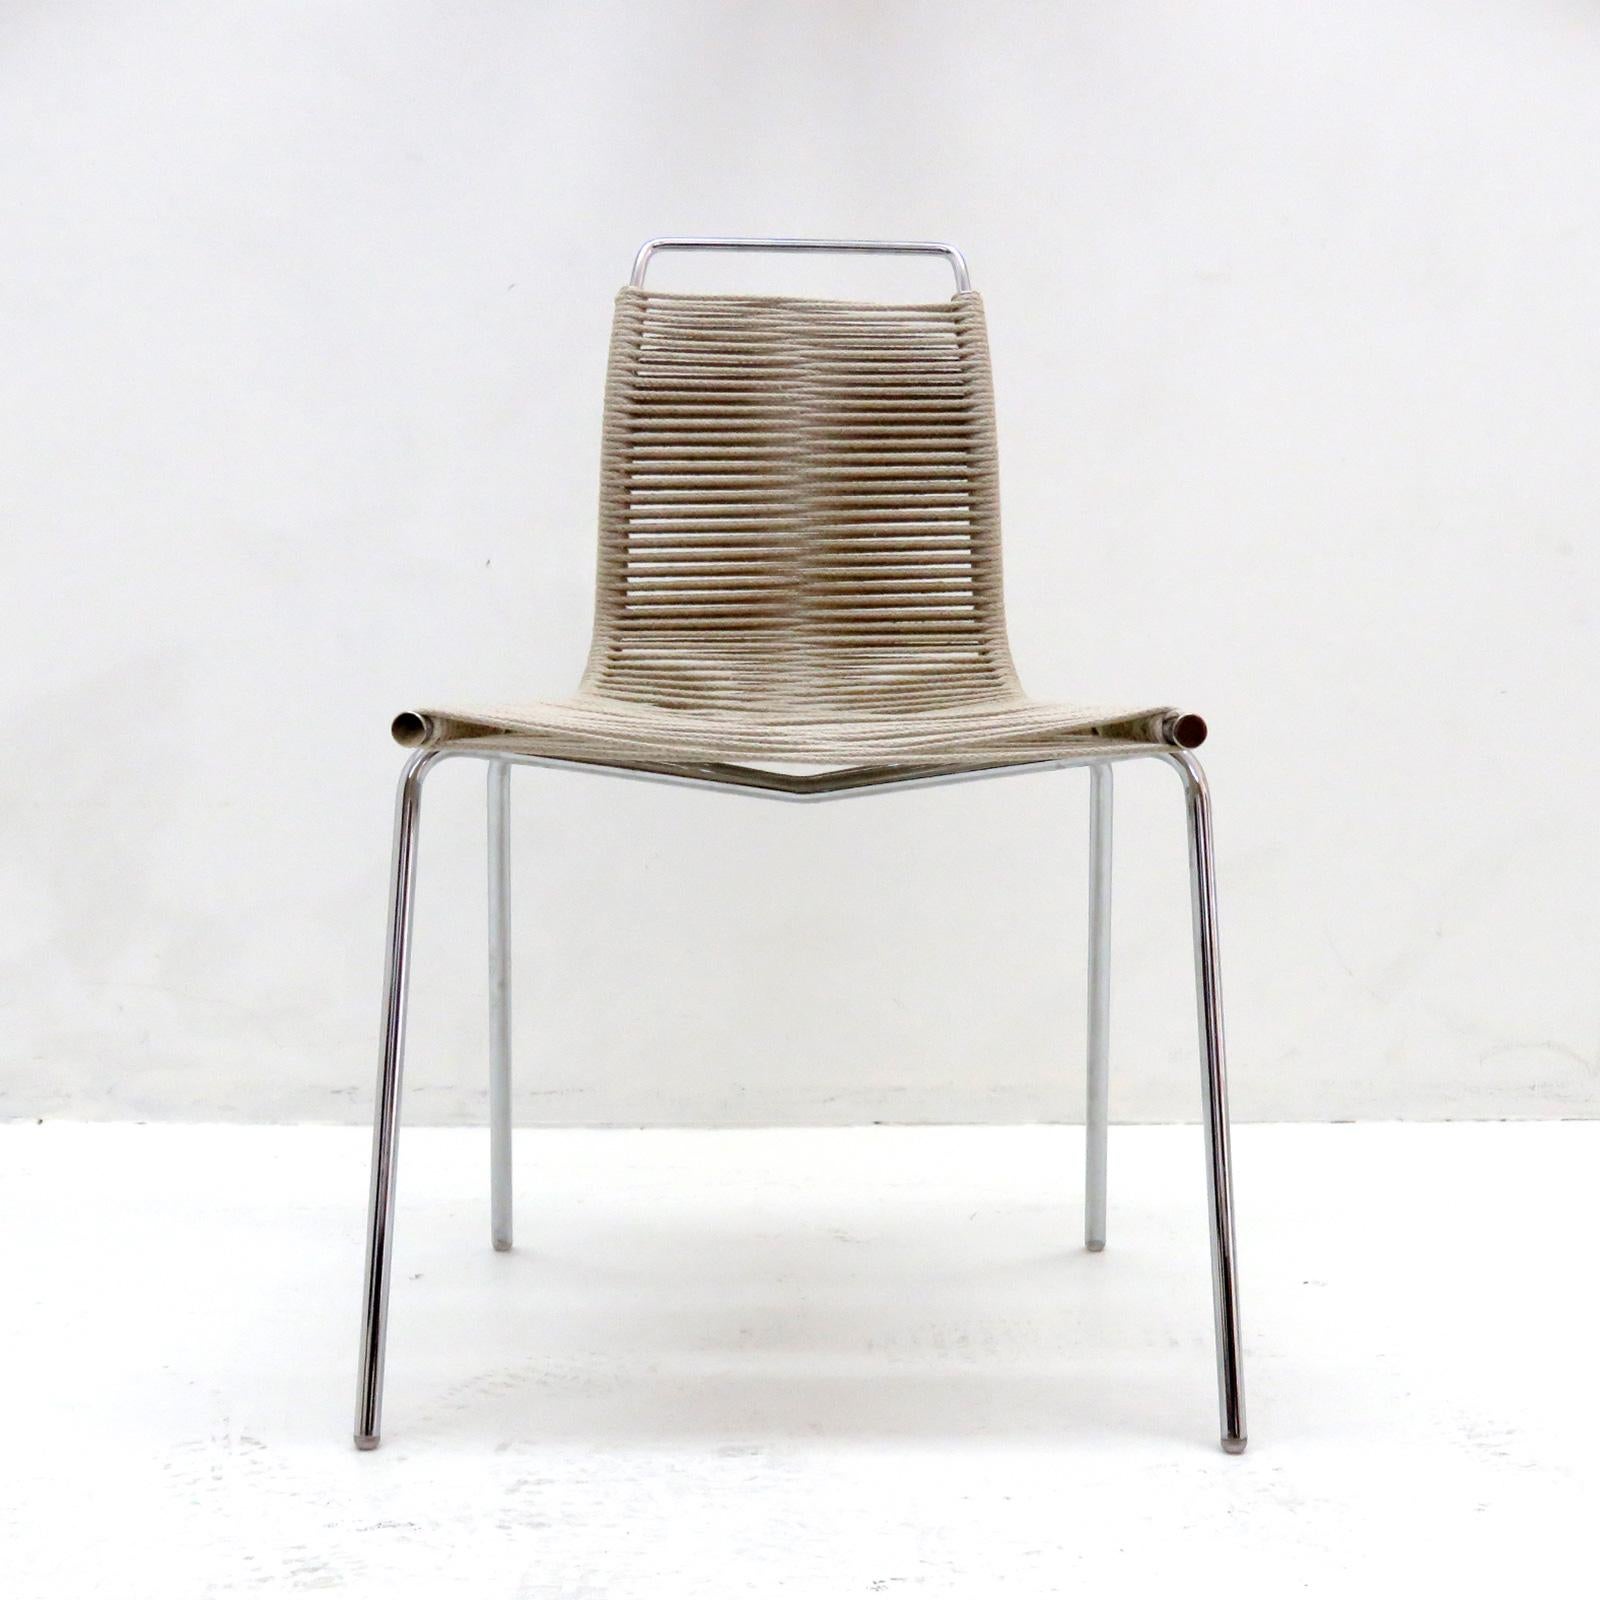 wonderful dining chair PK-1, designed by Poul Kjærholm in 1955, in chrome plated tubular steel with flag halyard.